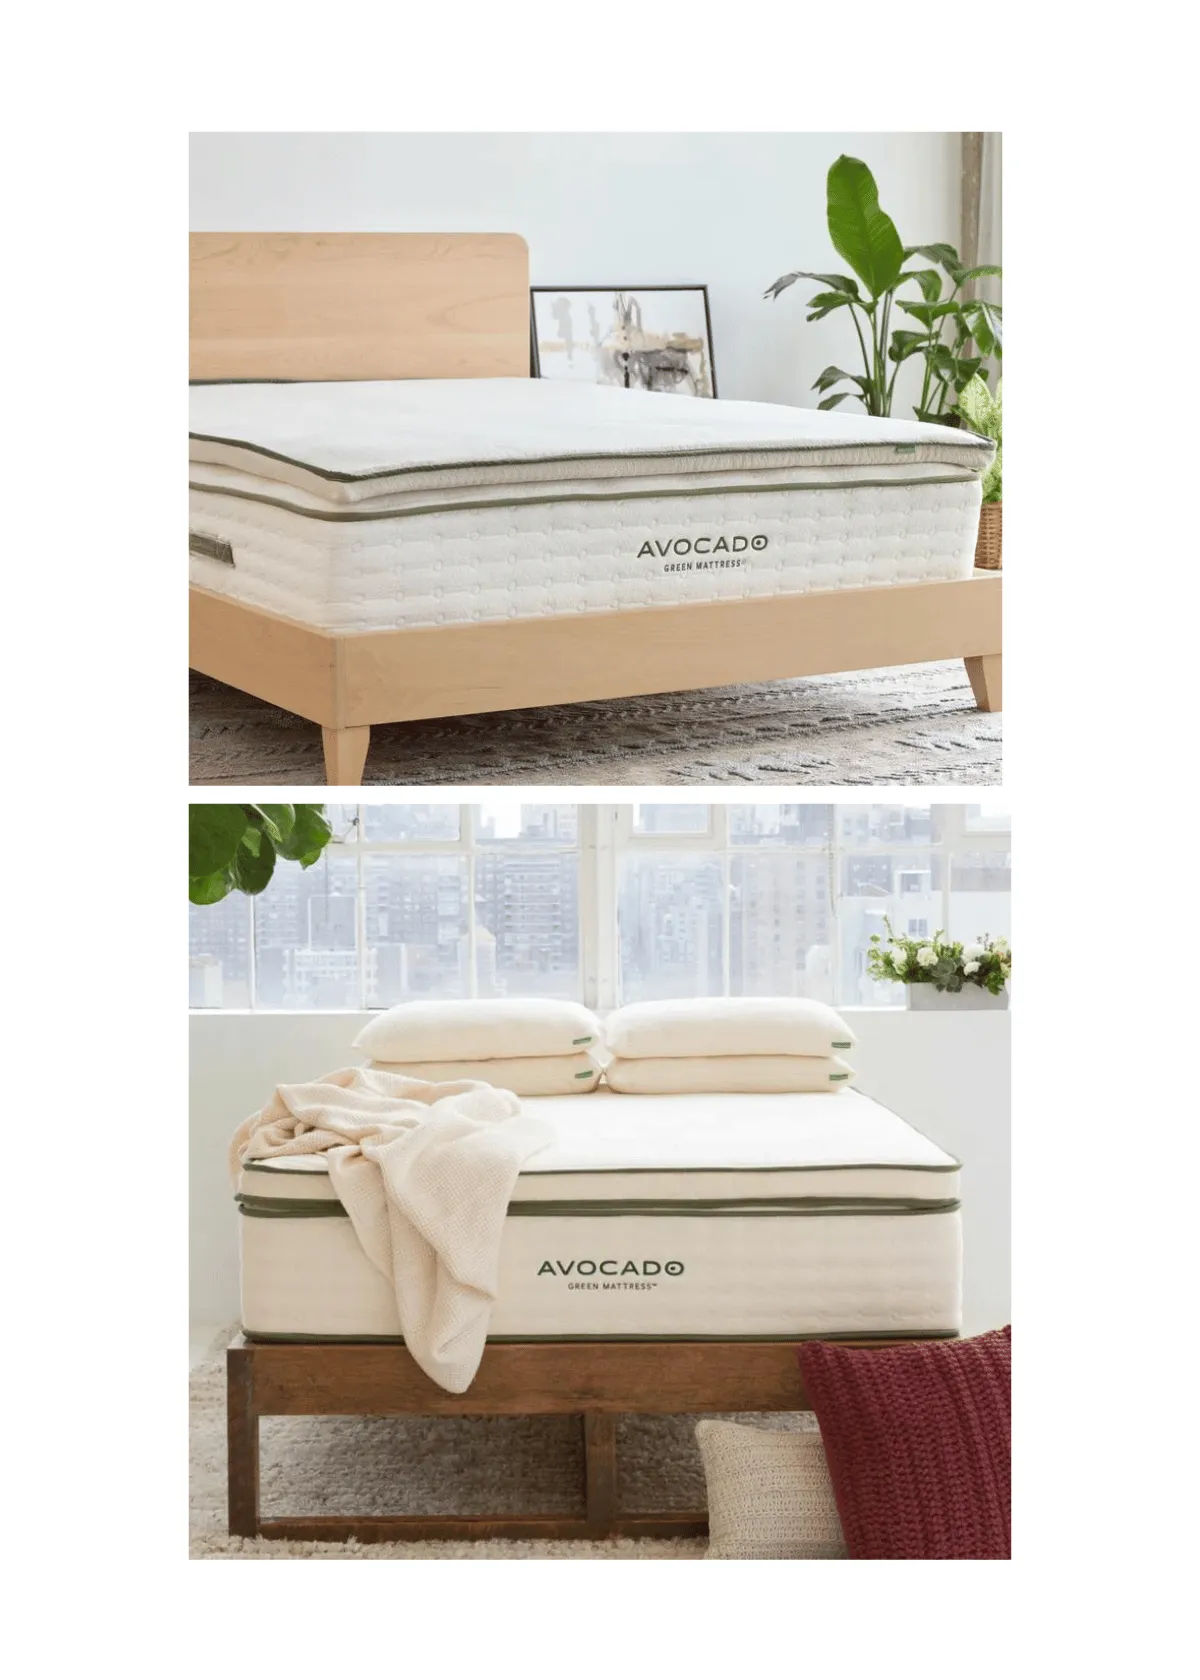 "Improve Sleep with the Avocado Mattress Topper: A Full Review"